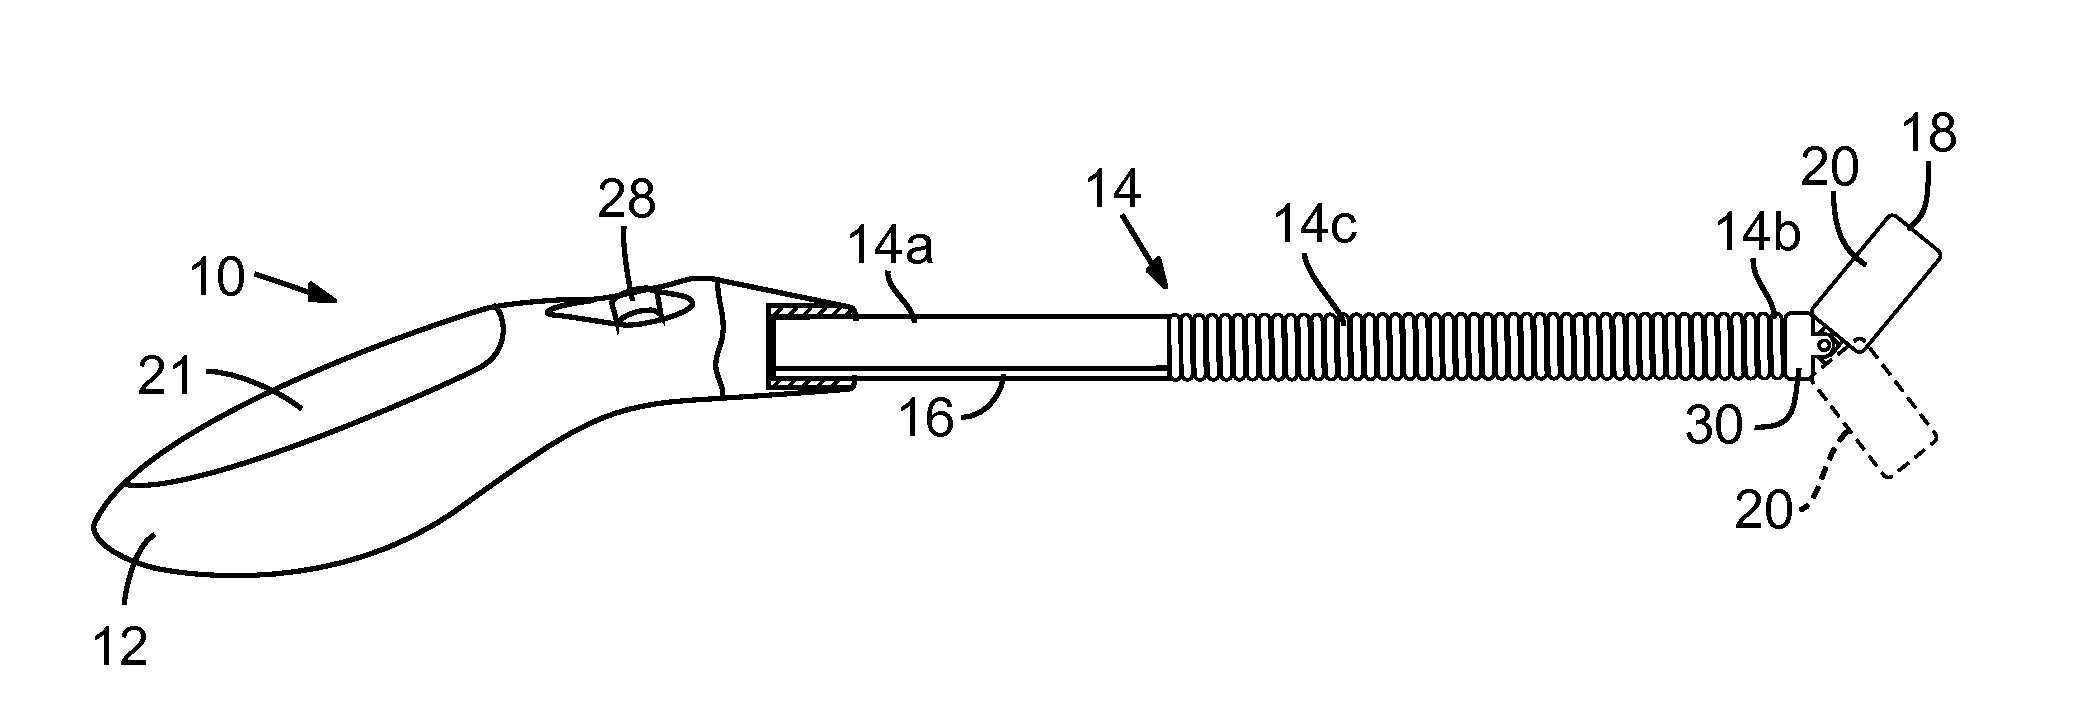 Oral scope system with image sensor and method for visual examination of oral cavity and upper airway